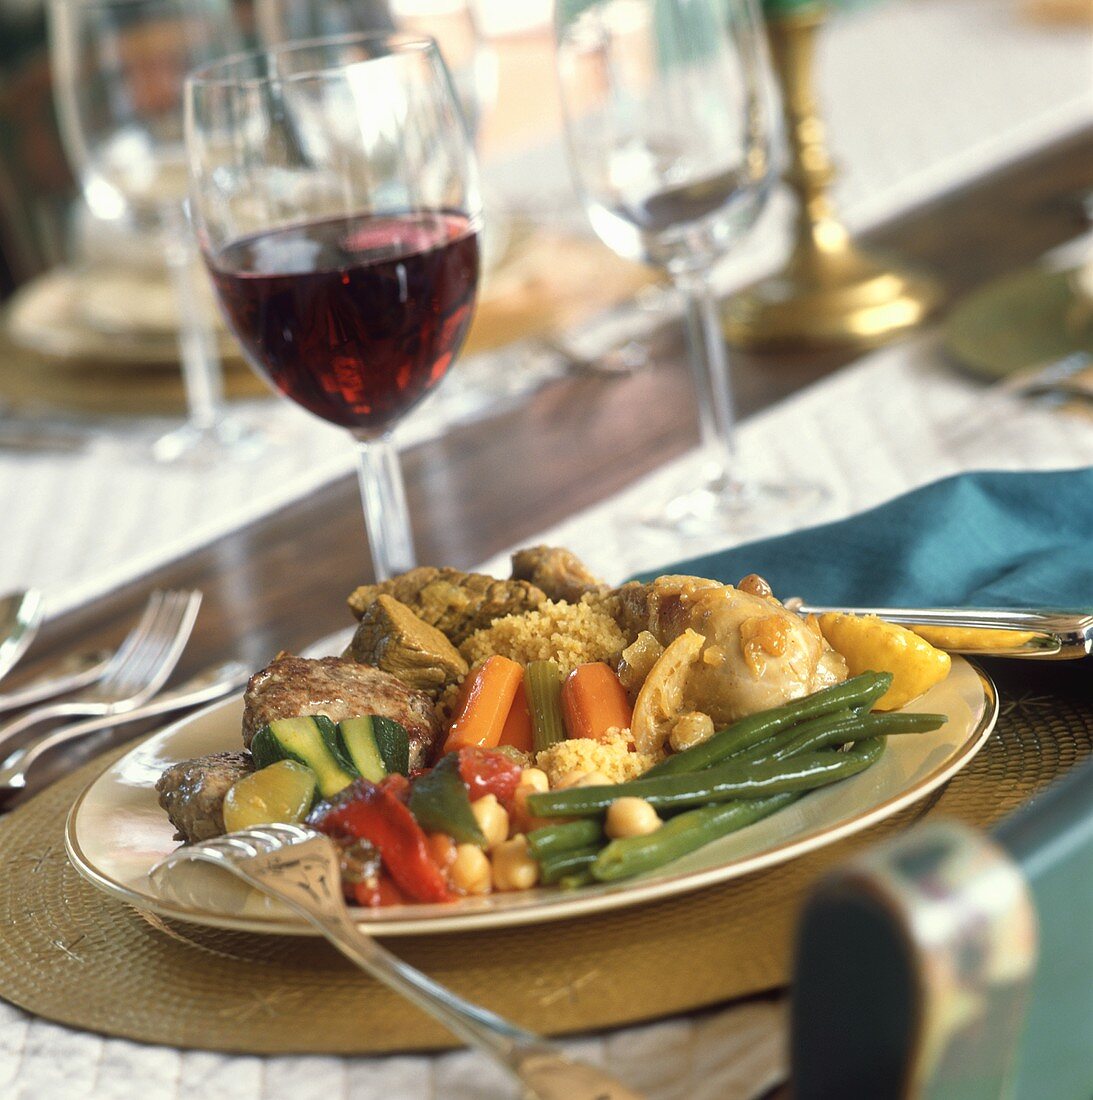 Chicken with stuffing and vegetables, glass of red wine